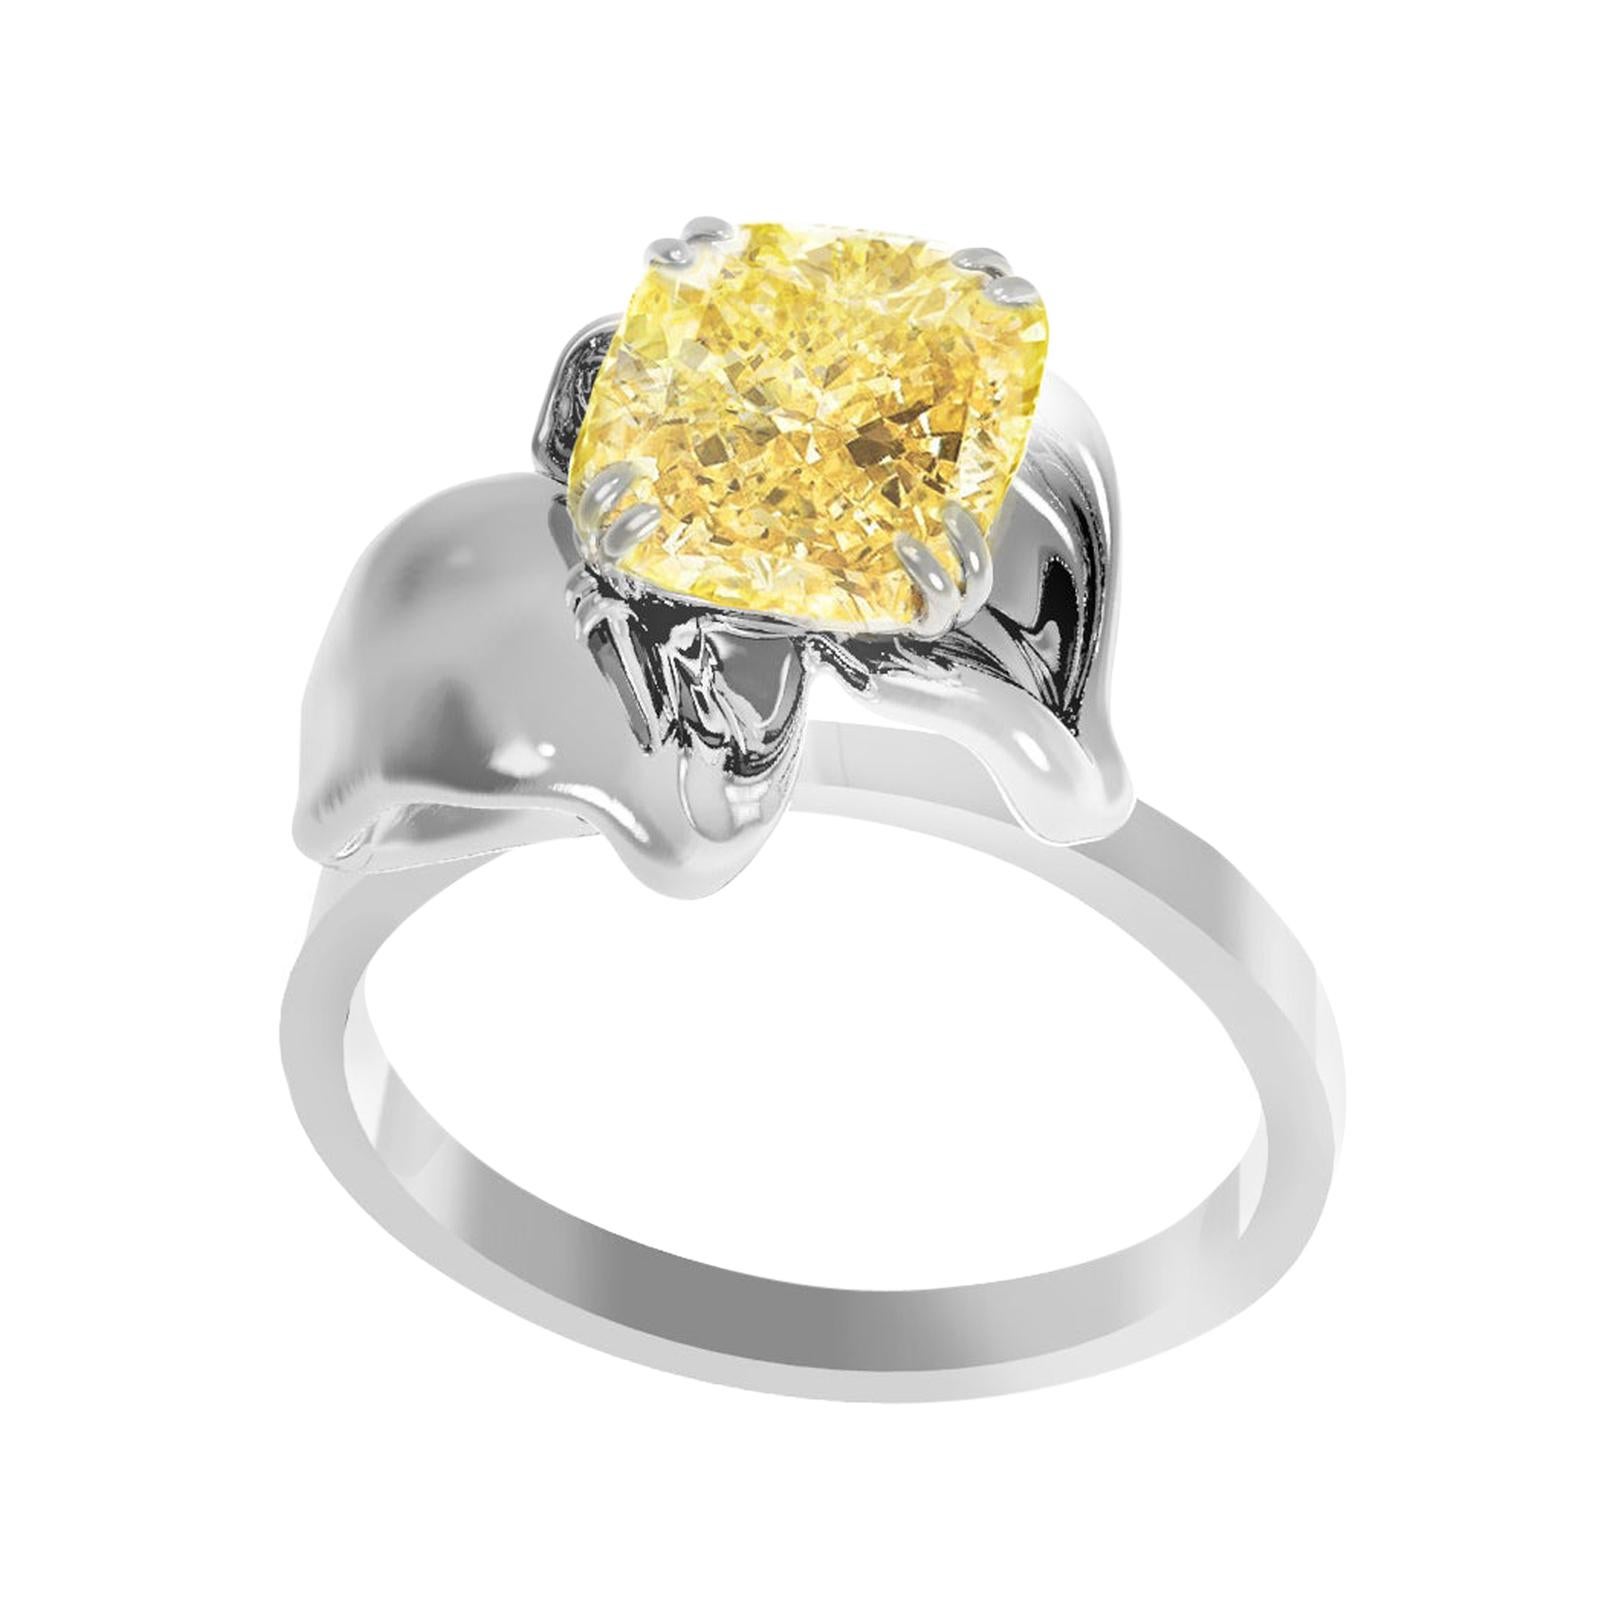 This Flower engagement ring is crafted from 18 karat white gold and features a GIA certified crushed ice cushion cut fancy light yellow diamond. The ring boasts exceptional craftsmanship, including precision work by expert jewelers, and a unique